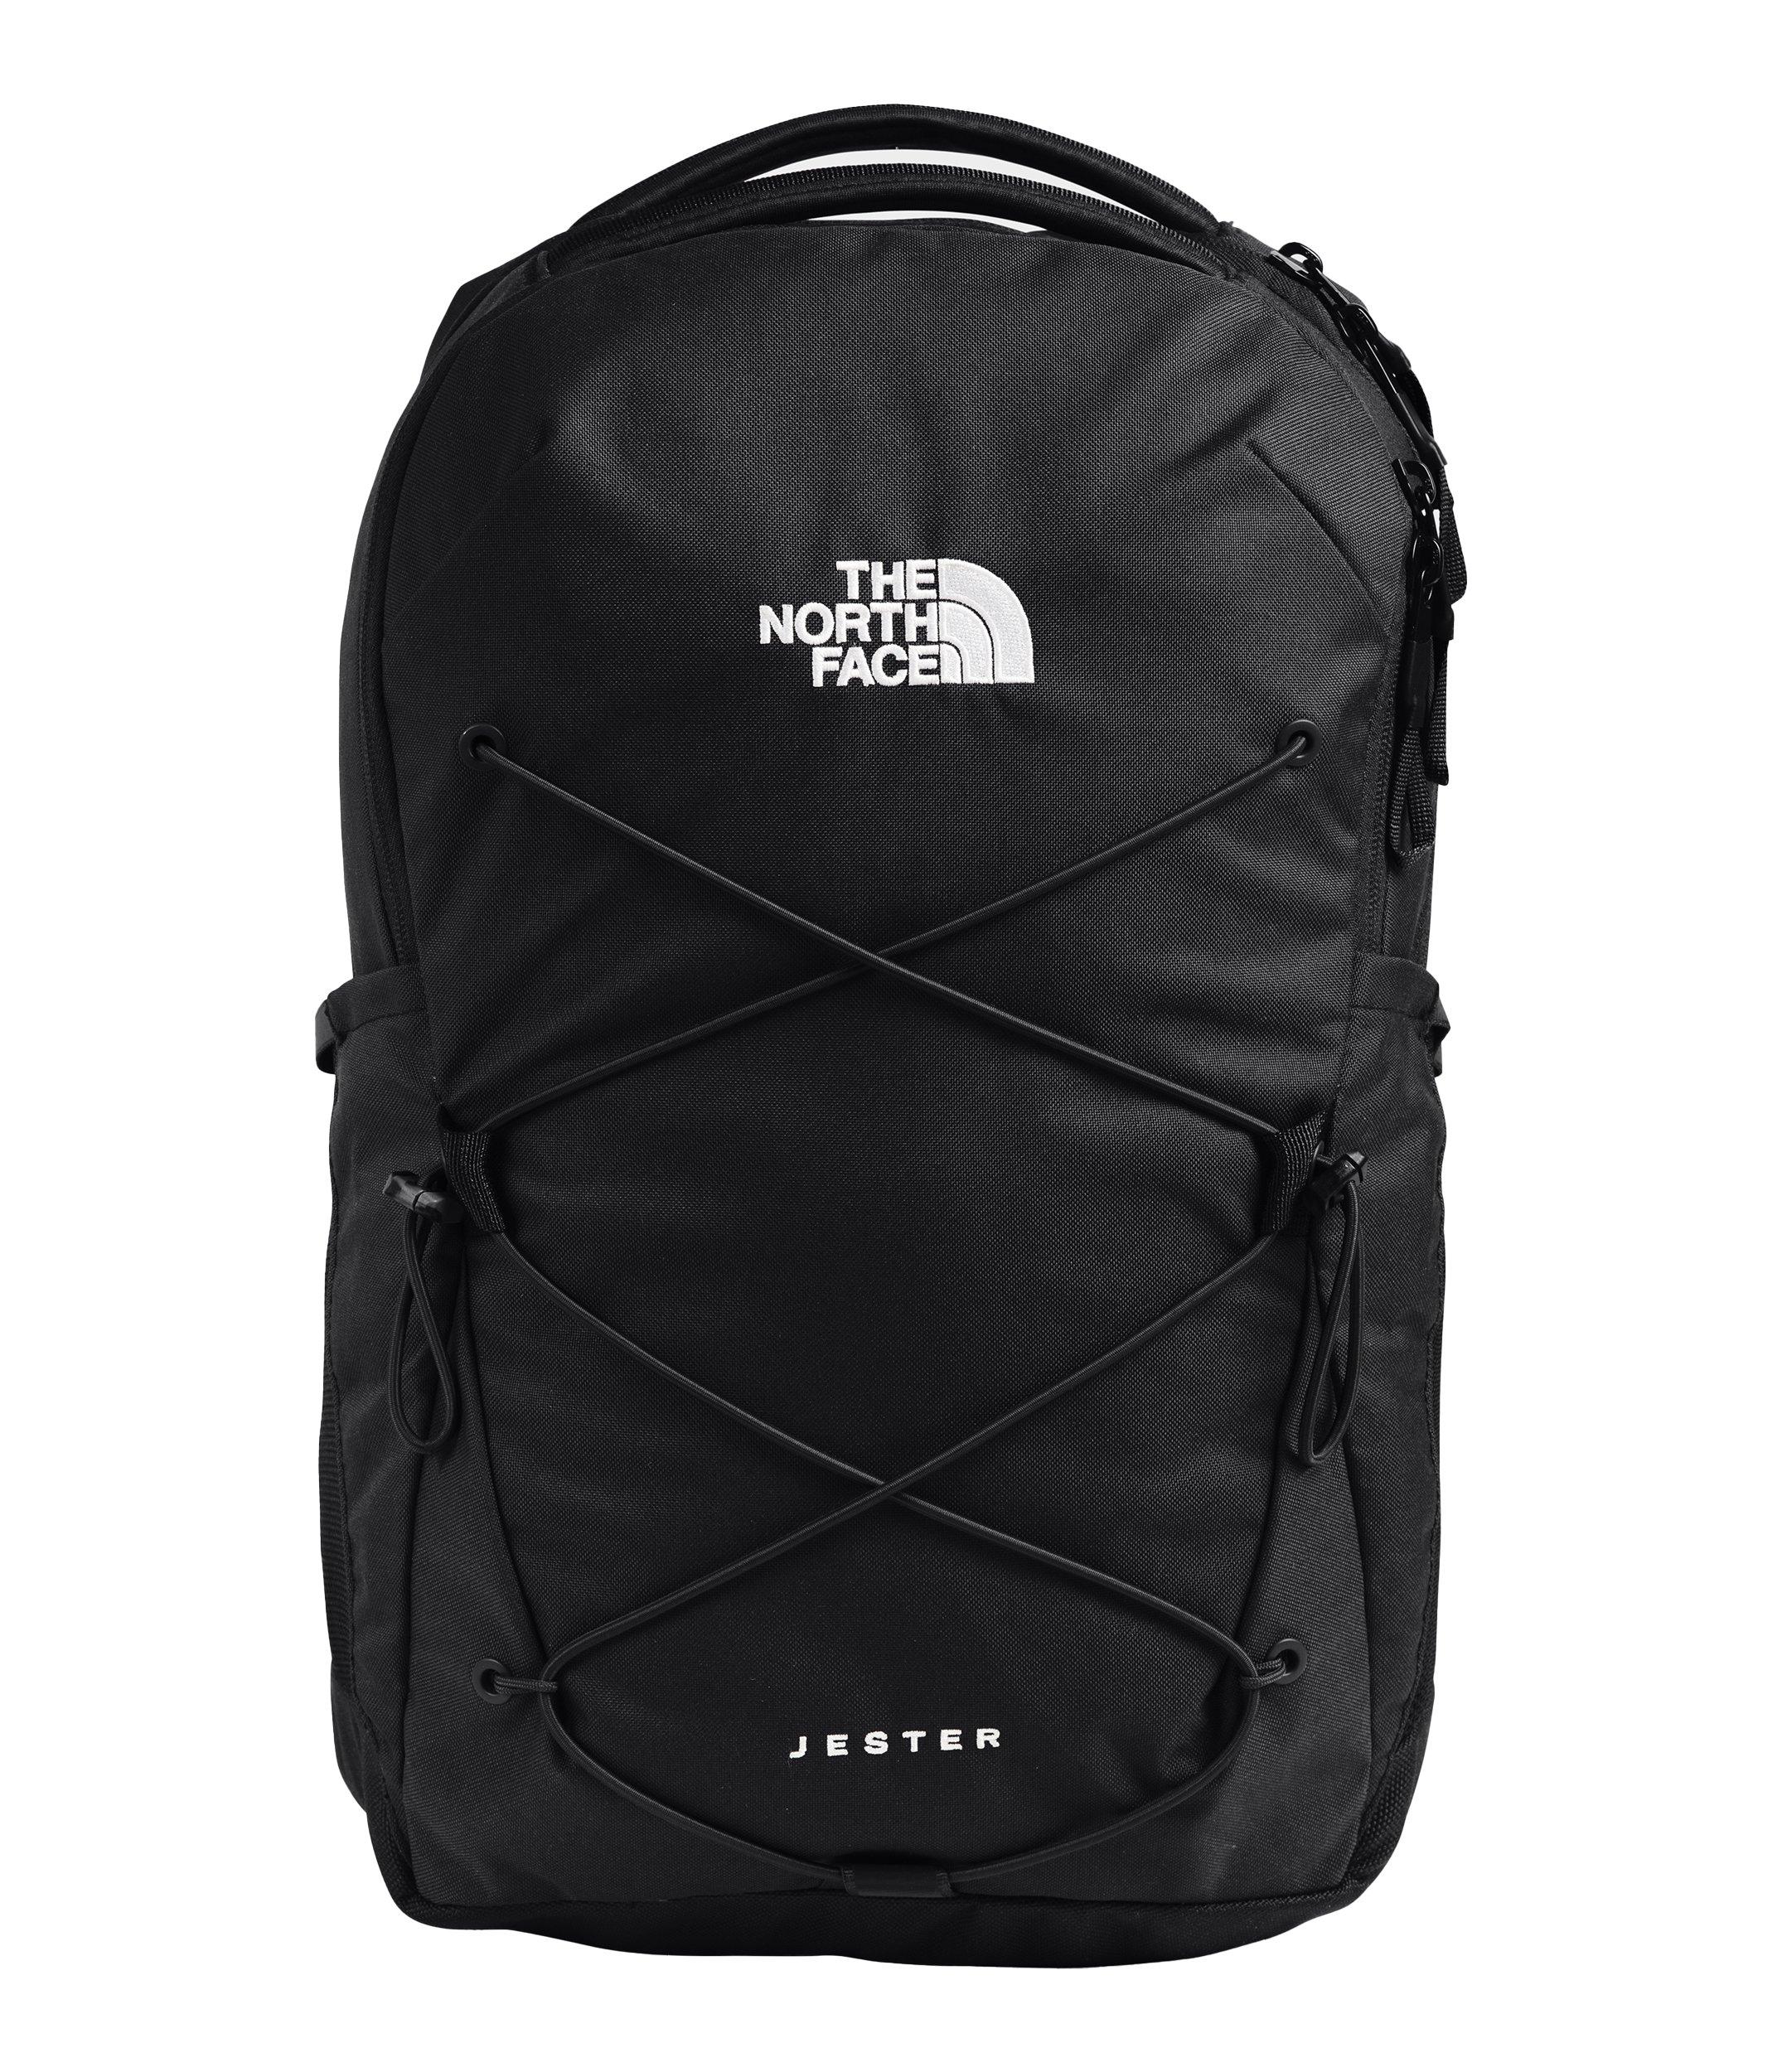 jcpenney north face backpack